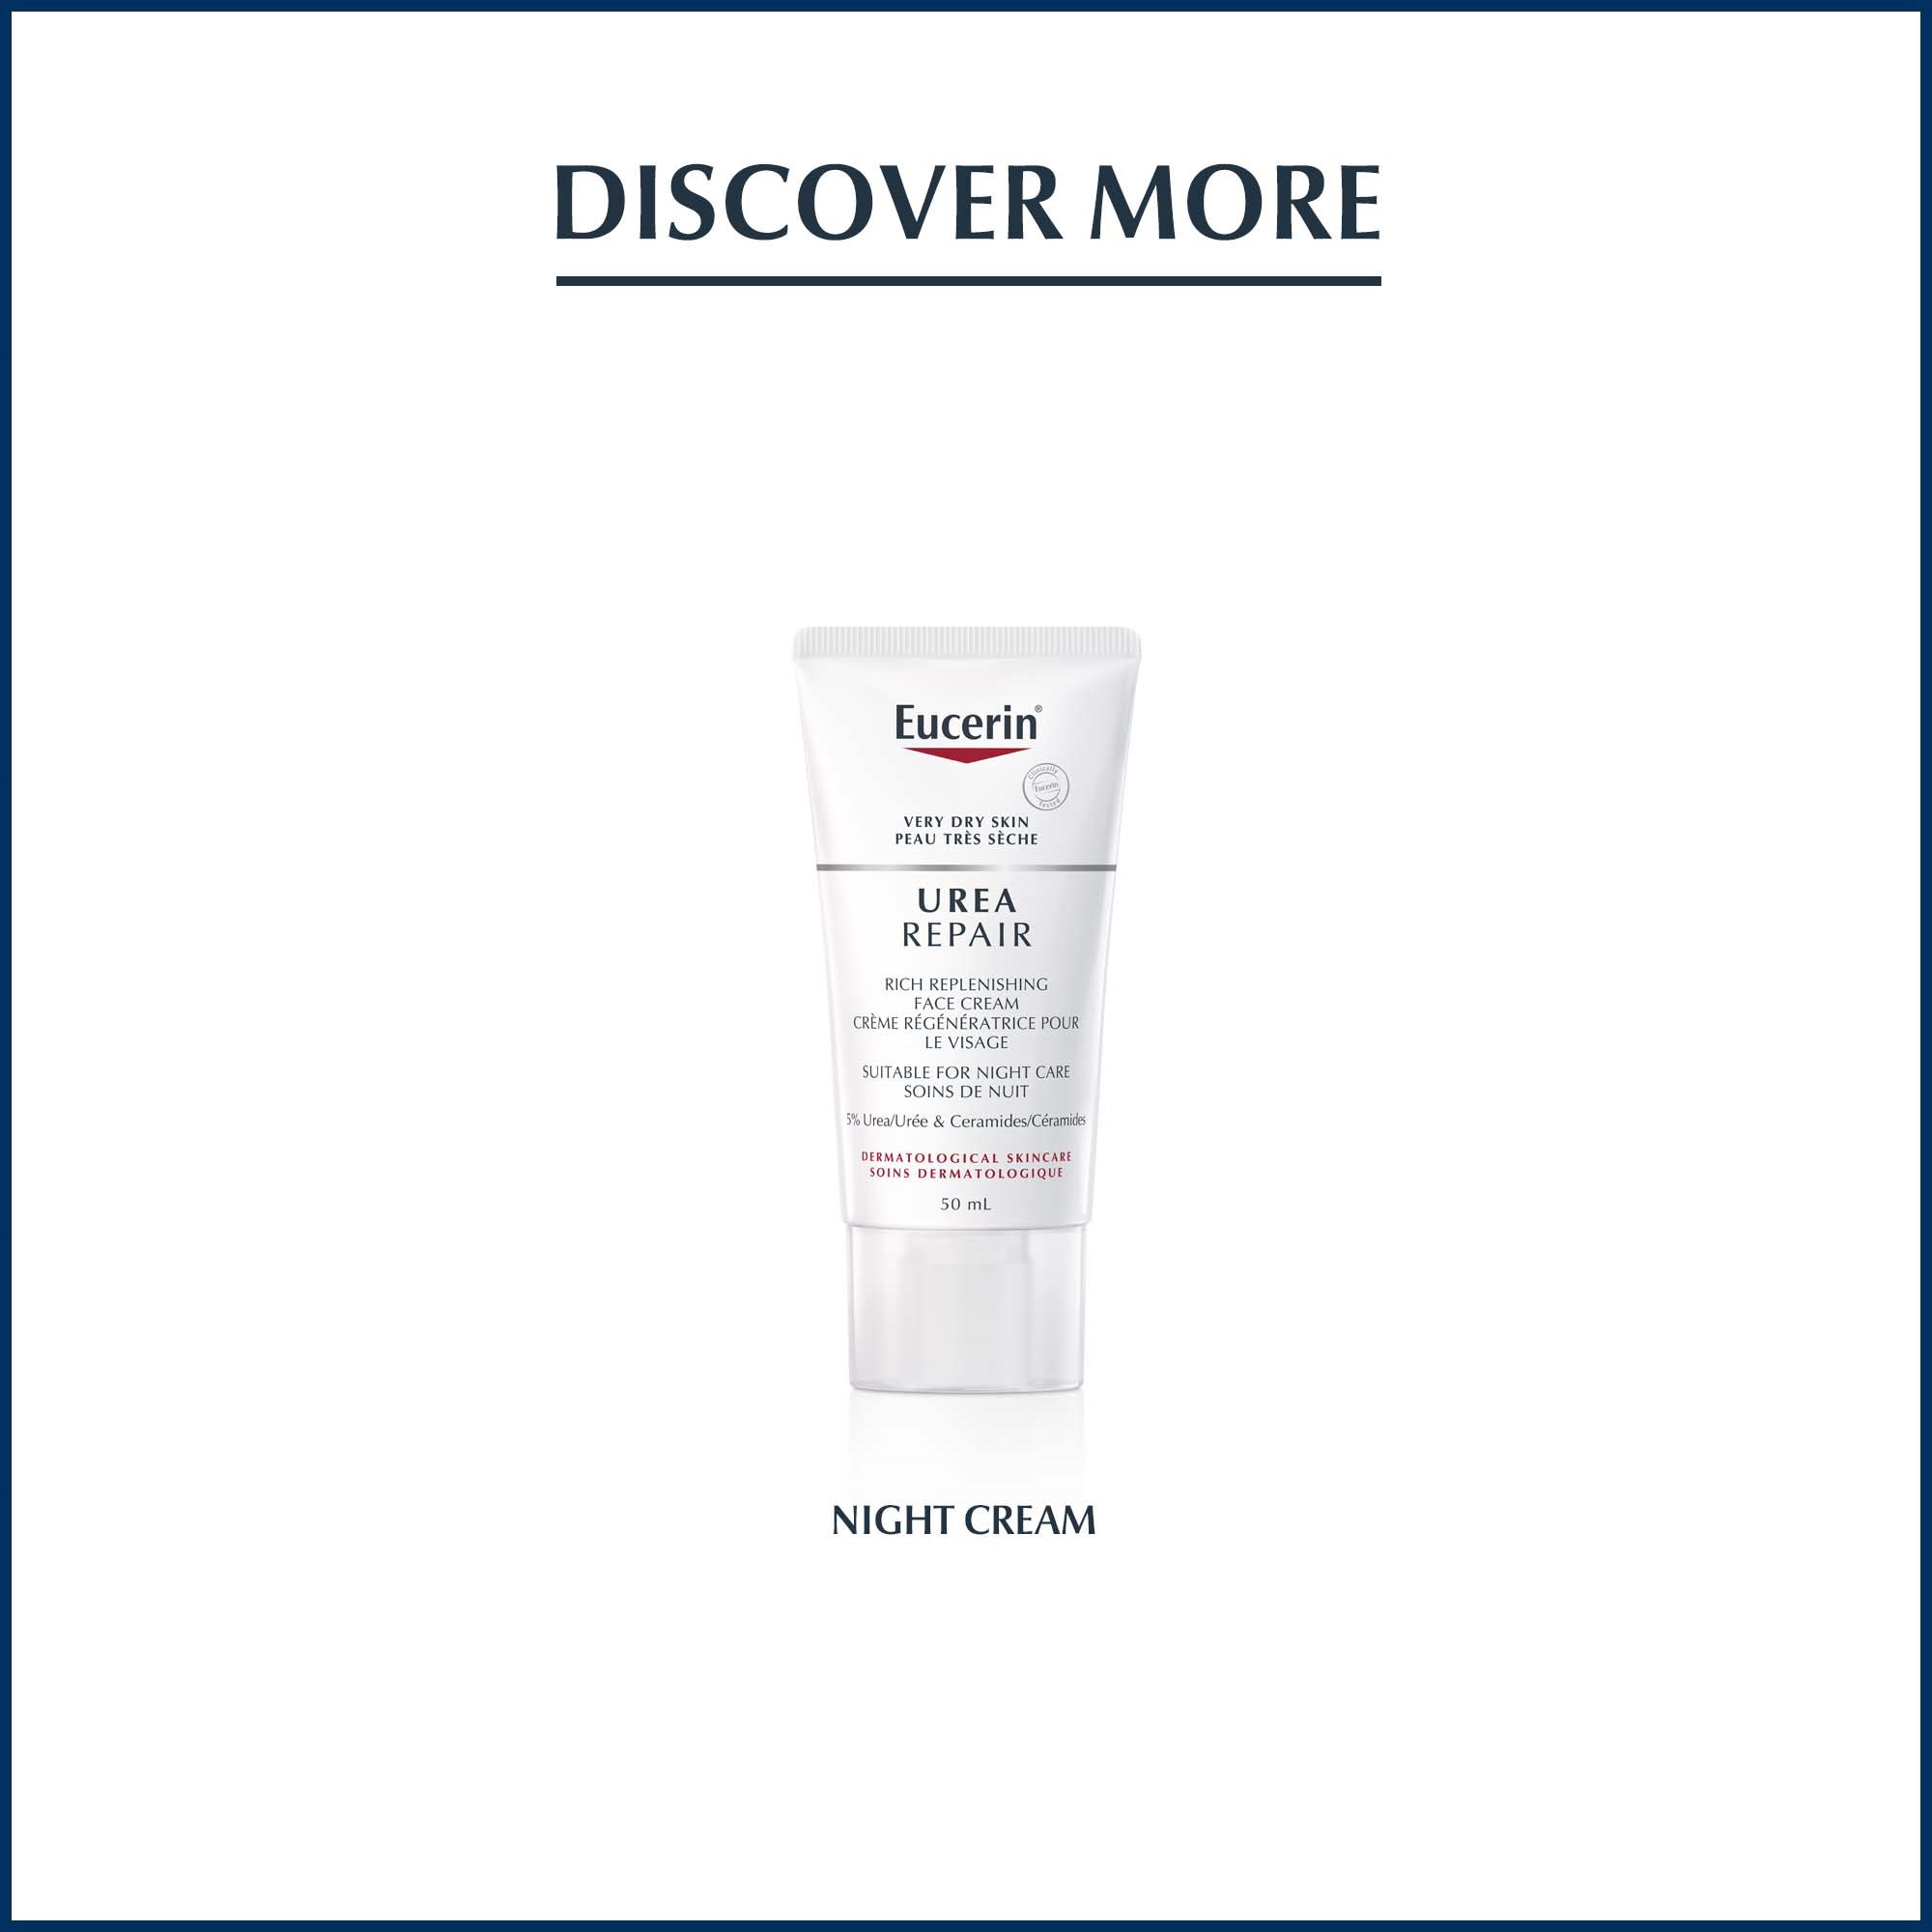 View of Eucerin Urea Repair rich replenishing face cream size 50 mL against a white background.